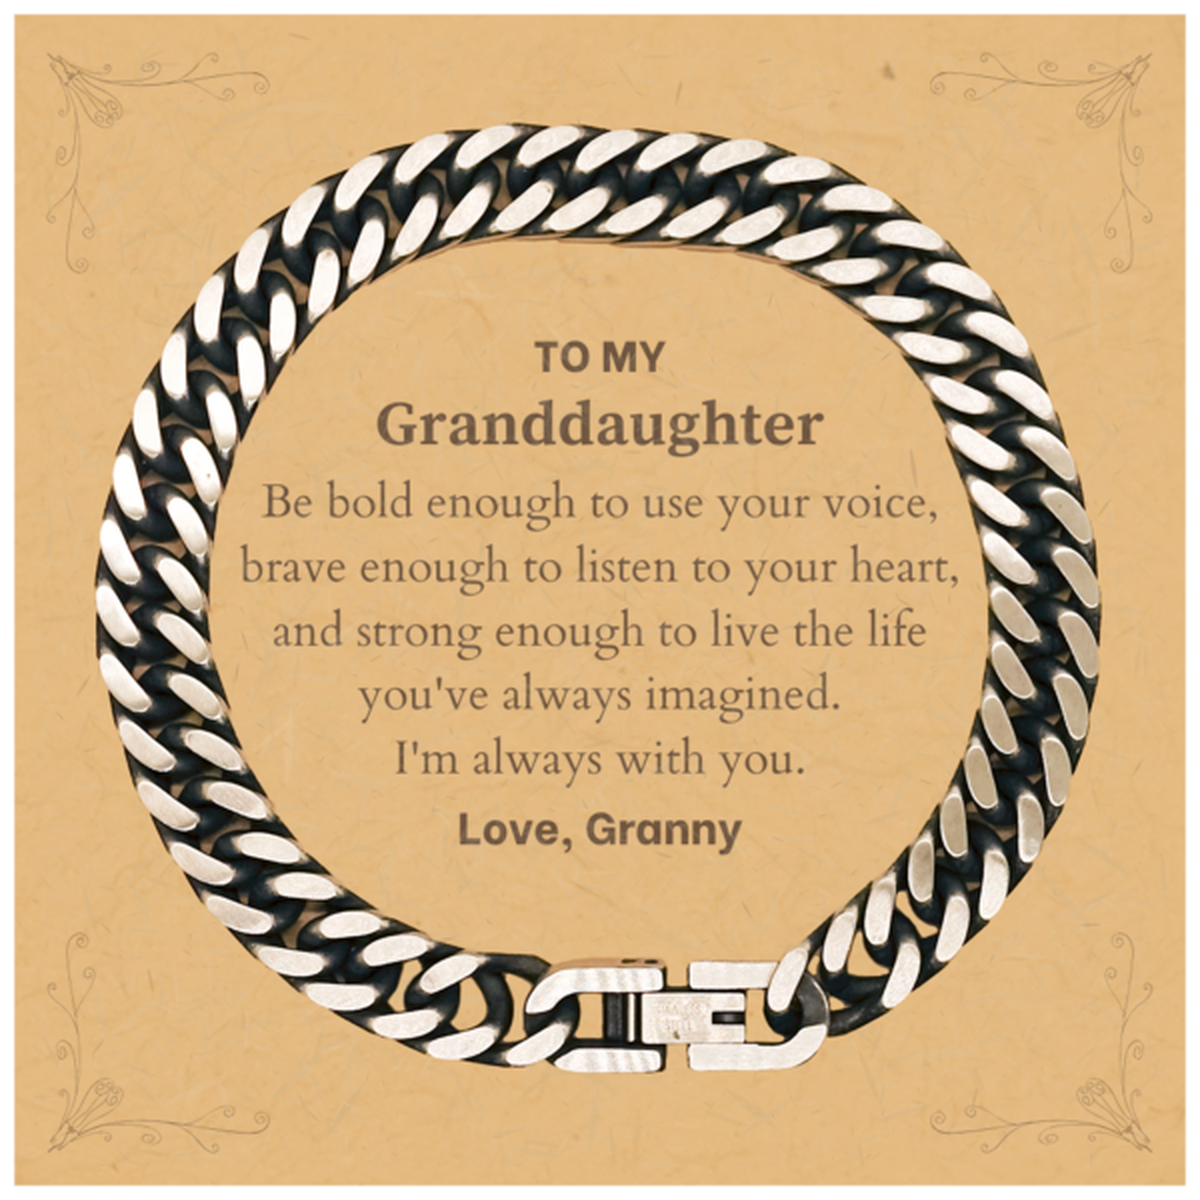 Keepsake Granddaughter Cuban Link Chain Bracelet Gift Idea Graduation Christmas Birthday Granddaughter from Granny, Granddaughter Be bold enough to use your voice, brave enough to listen to your heart. Love, Granny